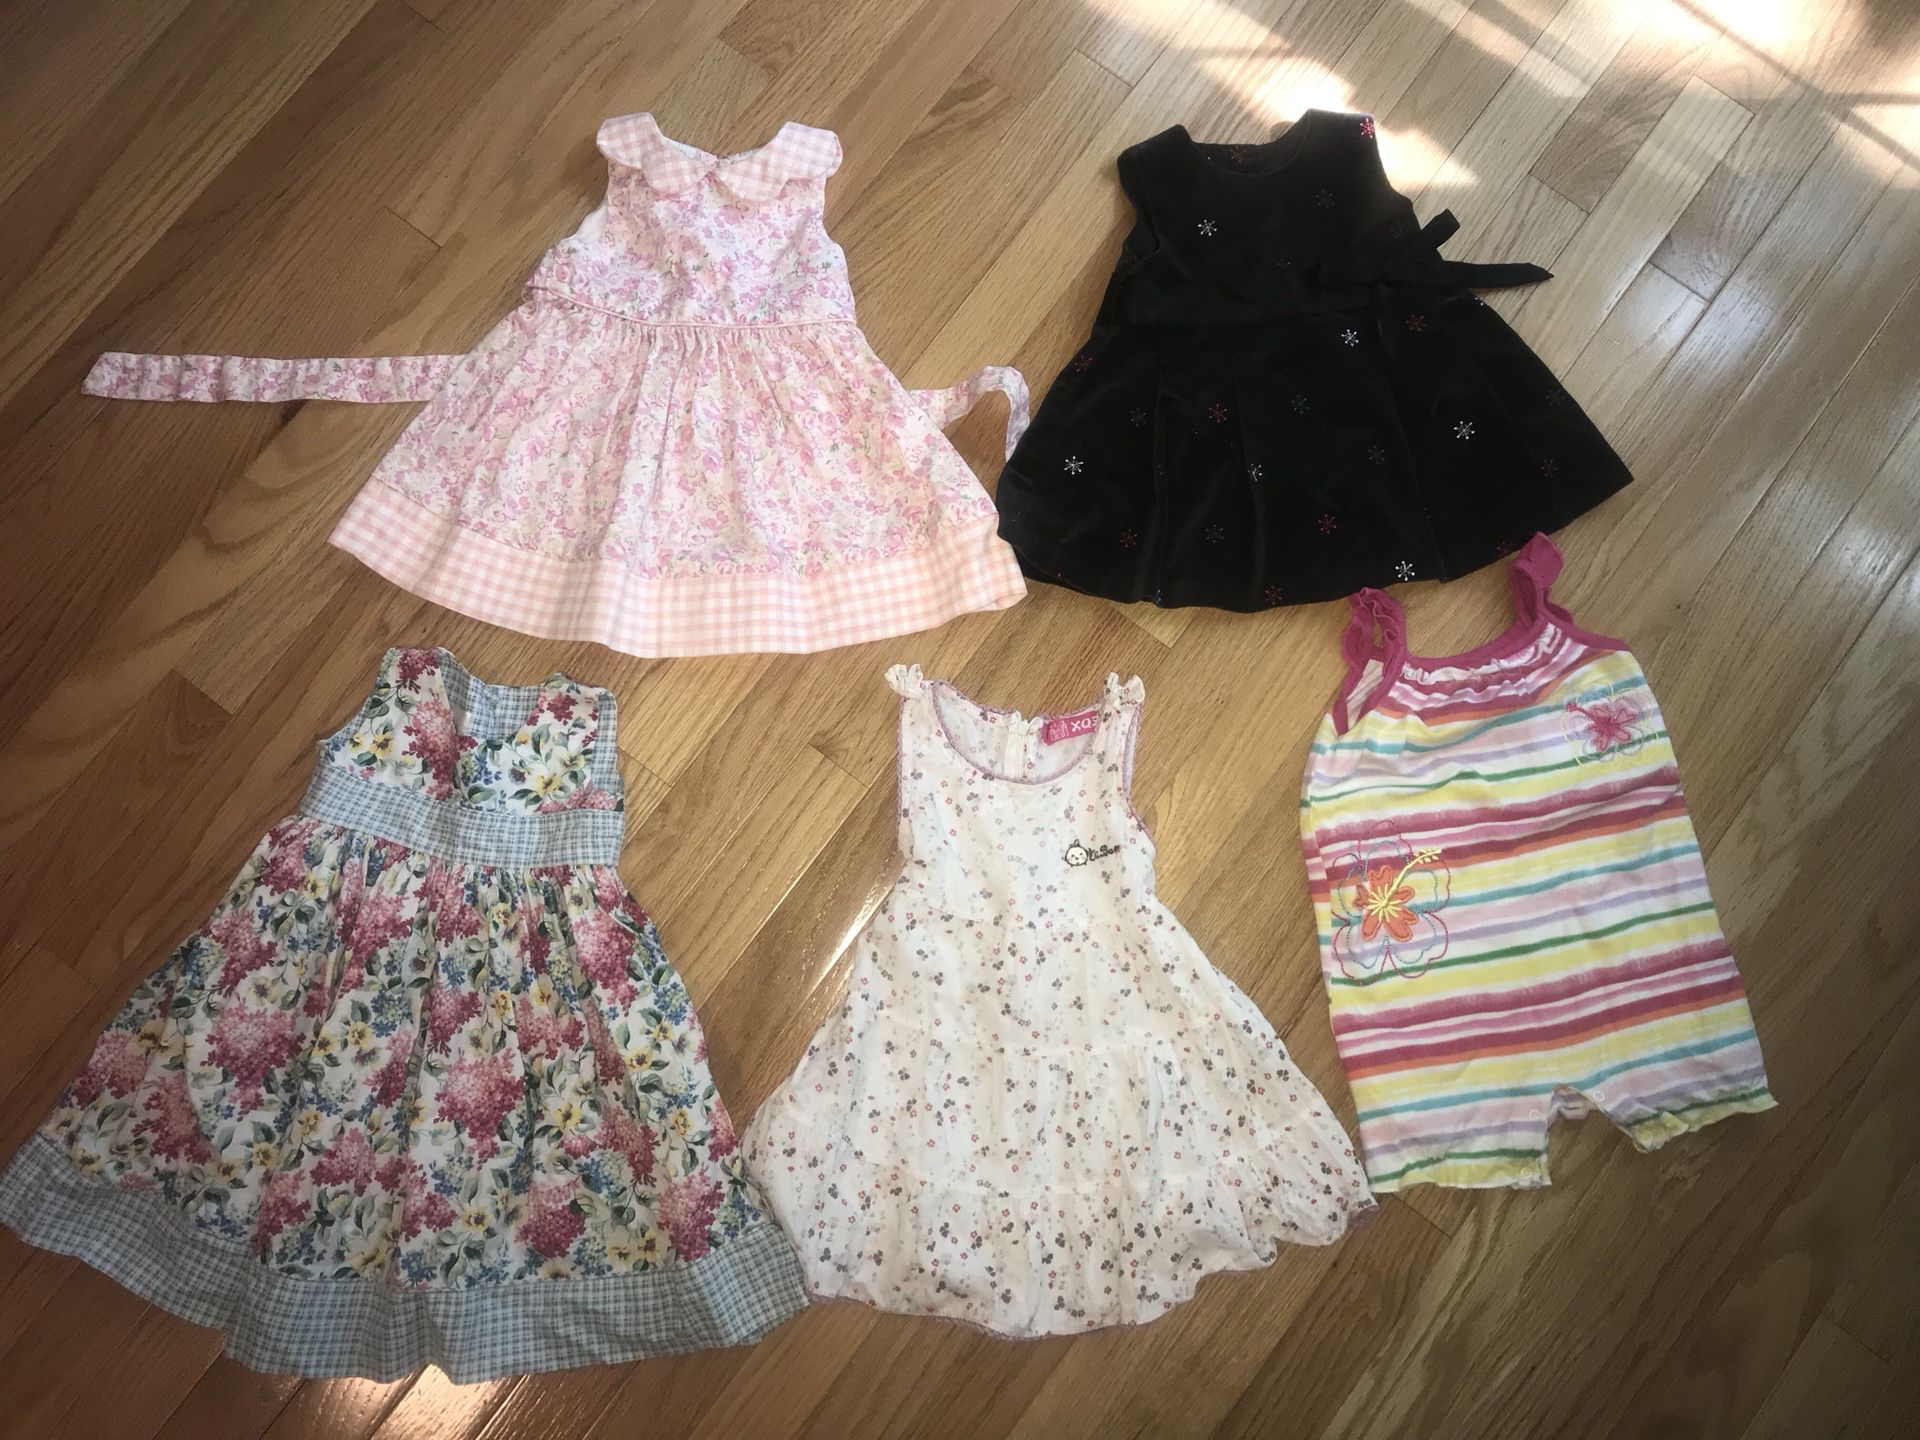 Dresses, shorts and romper size 12months